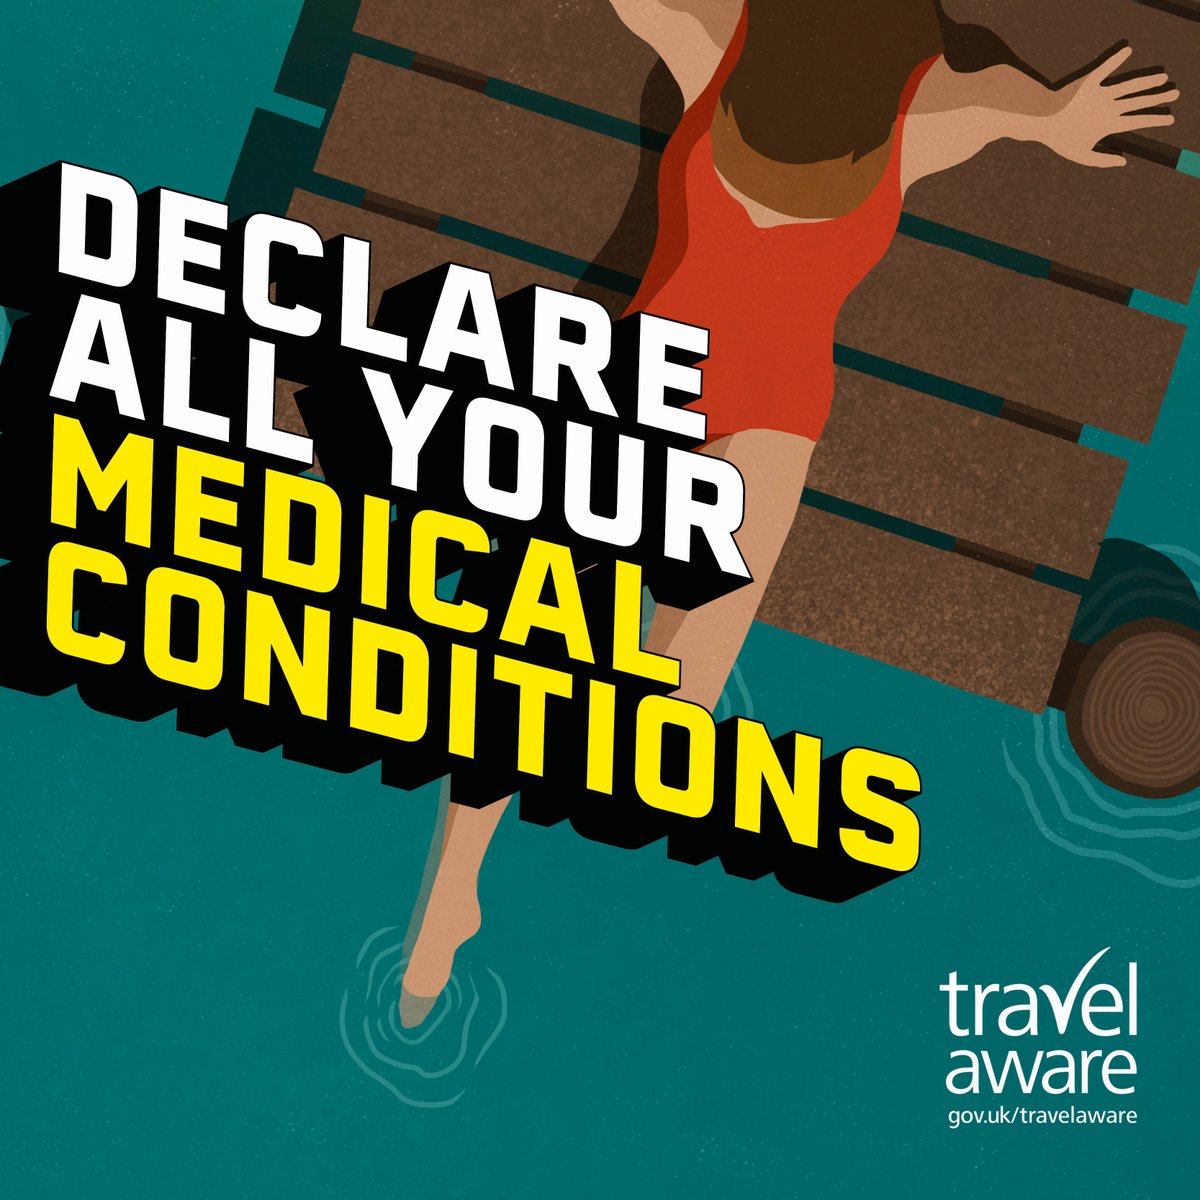 Planning your summer holiday abroad? Travel insurance is a holiday essential. Make sure you declare any pre-existing medical conditions – don’t risk your policy becoming invalid and a big bill if things go wrong. Find out more 👉 ow.ly/9RuF50OZsic #TravelAware